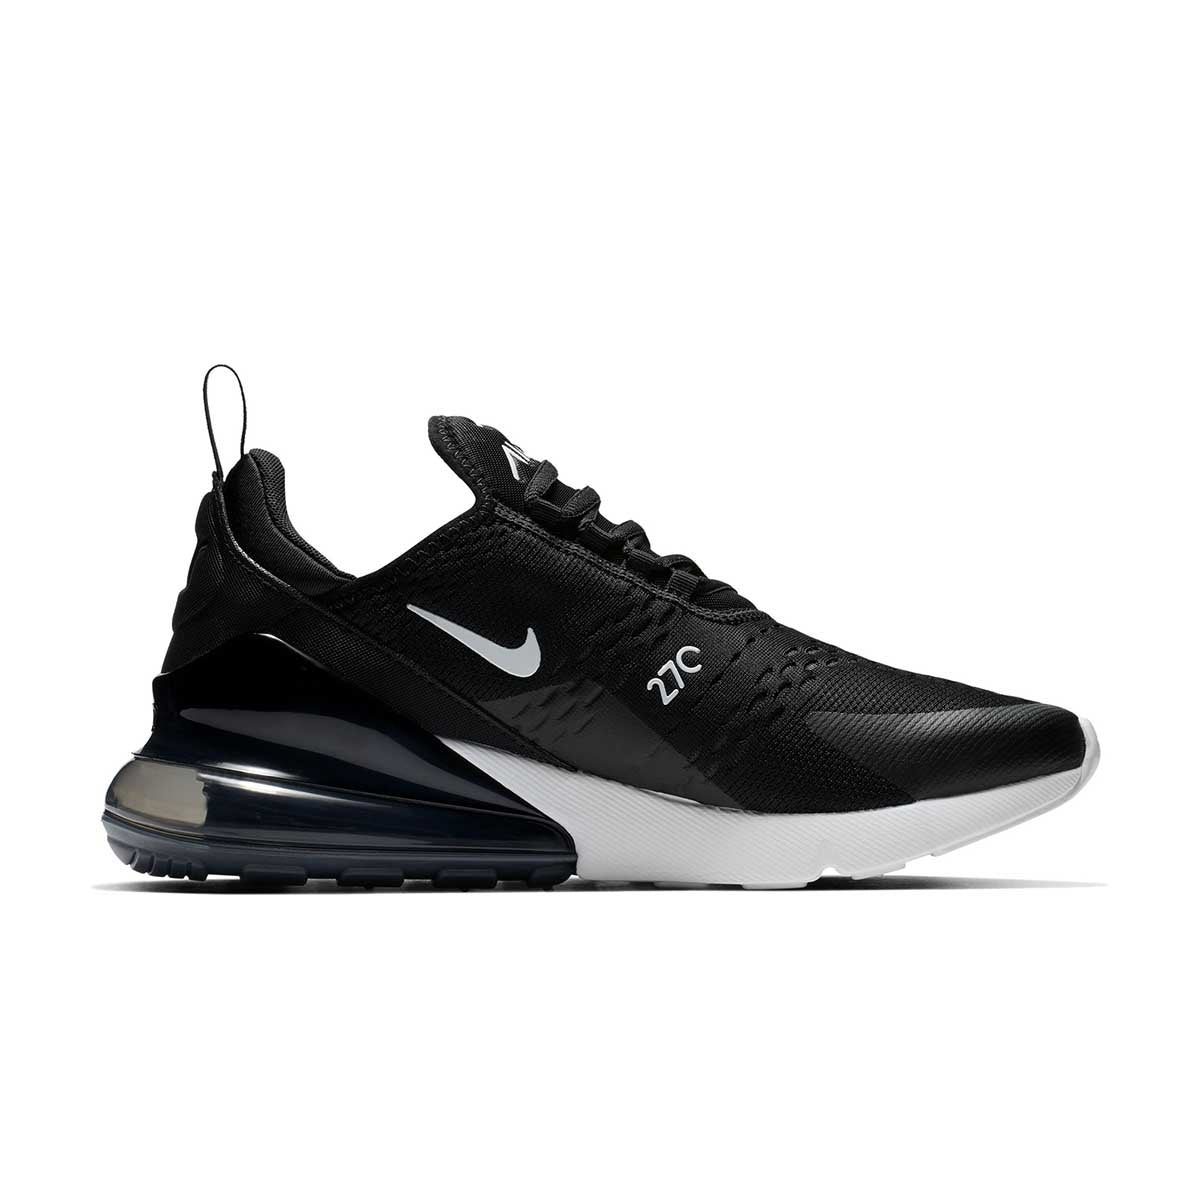 Women's cheap Nike clearance air max 2 strong white black friday